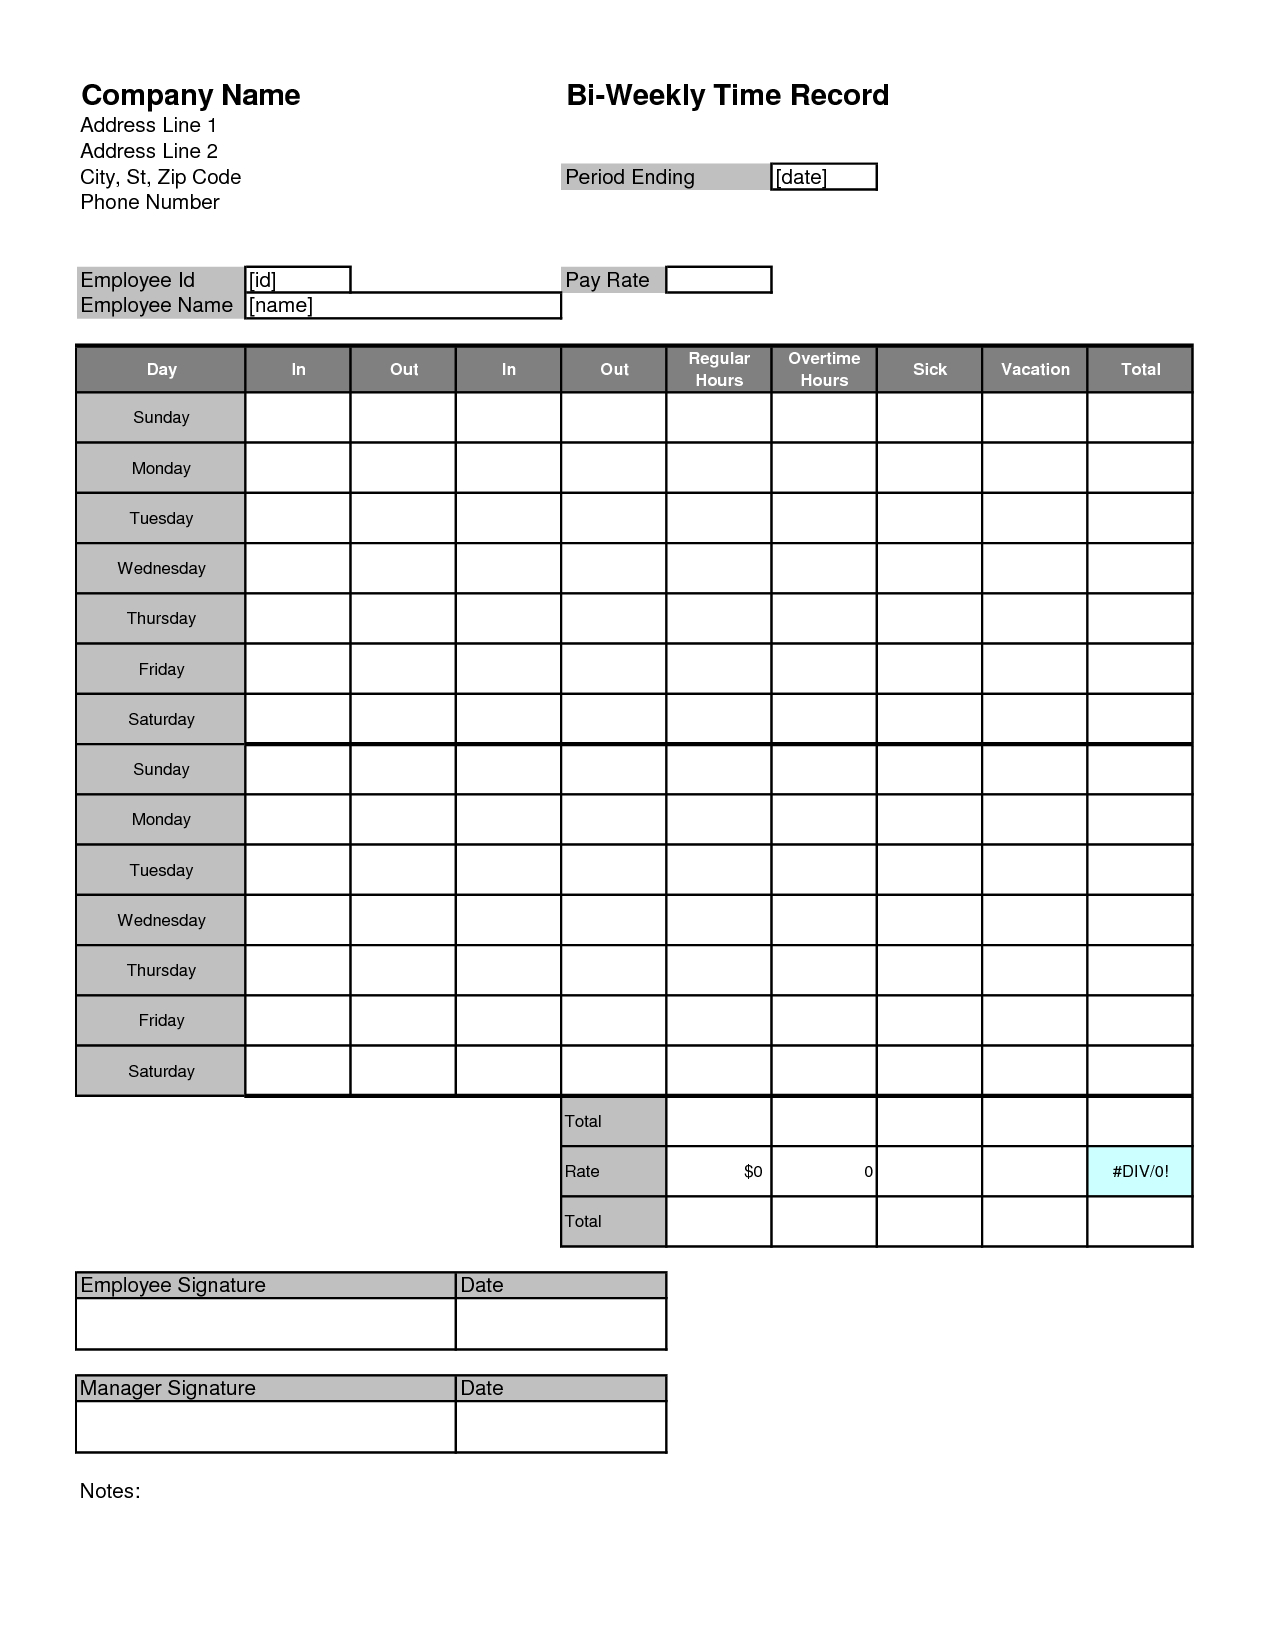 Images For > Time Card Template | Timesheets | Timesheet For Sample Job Cards Templates